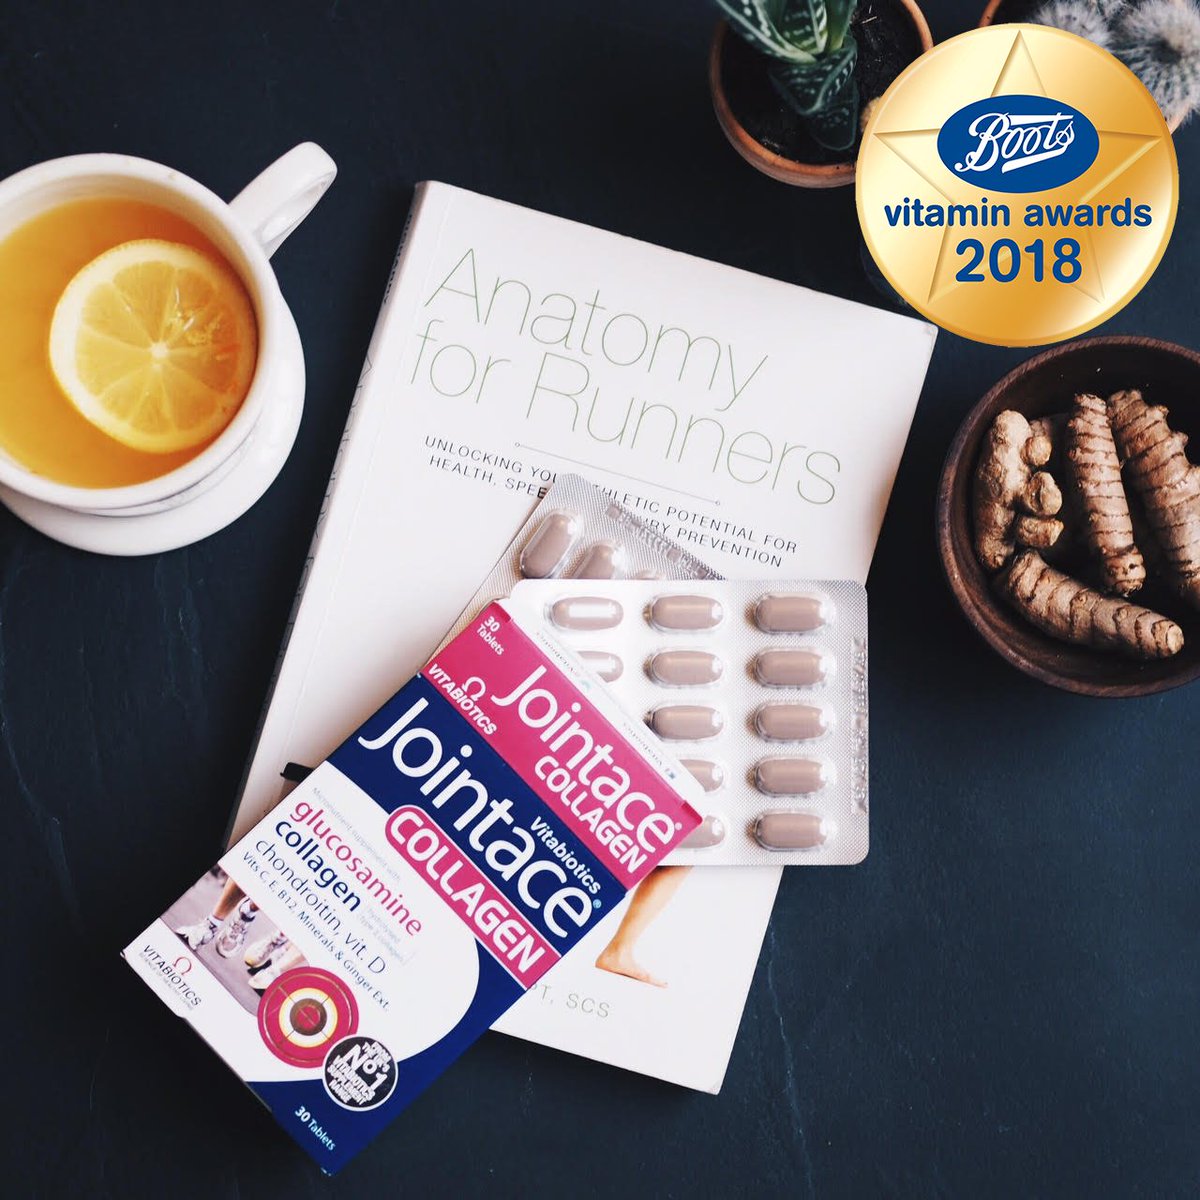 Vitabiotics We Re Very Excited That Jointace Collagen Was Voted As Favourite Joints Product In The Boots Uk Vitamins Awards 18 T Co Tgi5lojjlx T Co Ph49n4waop